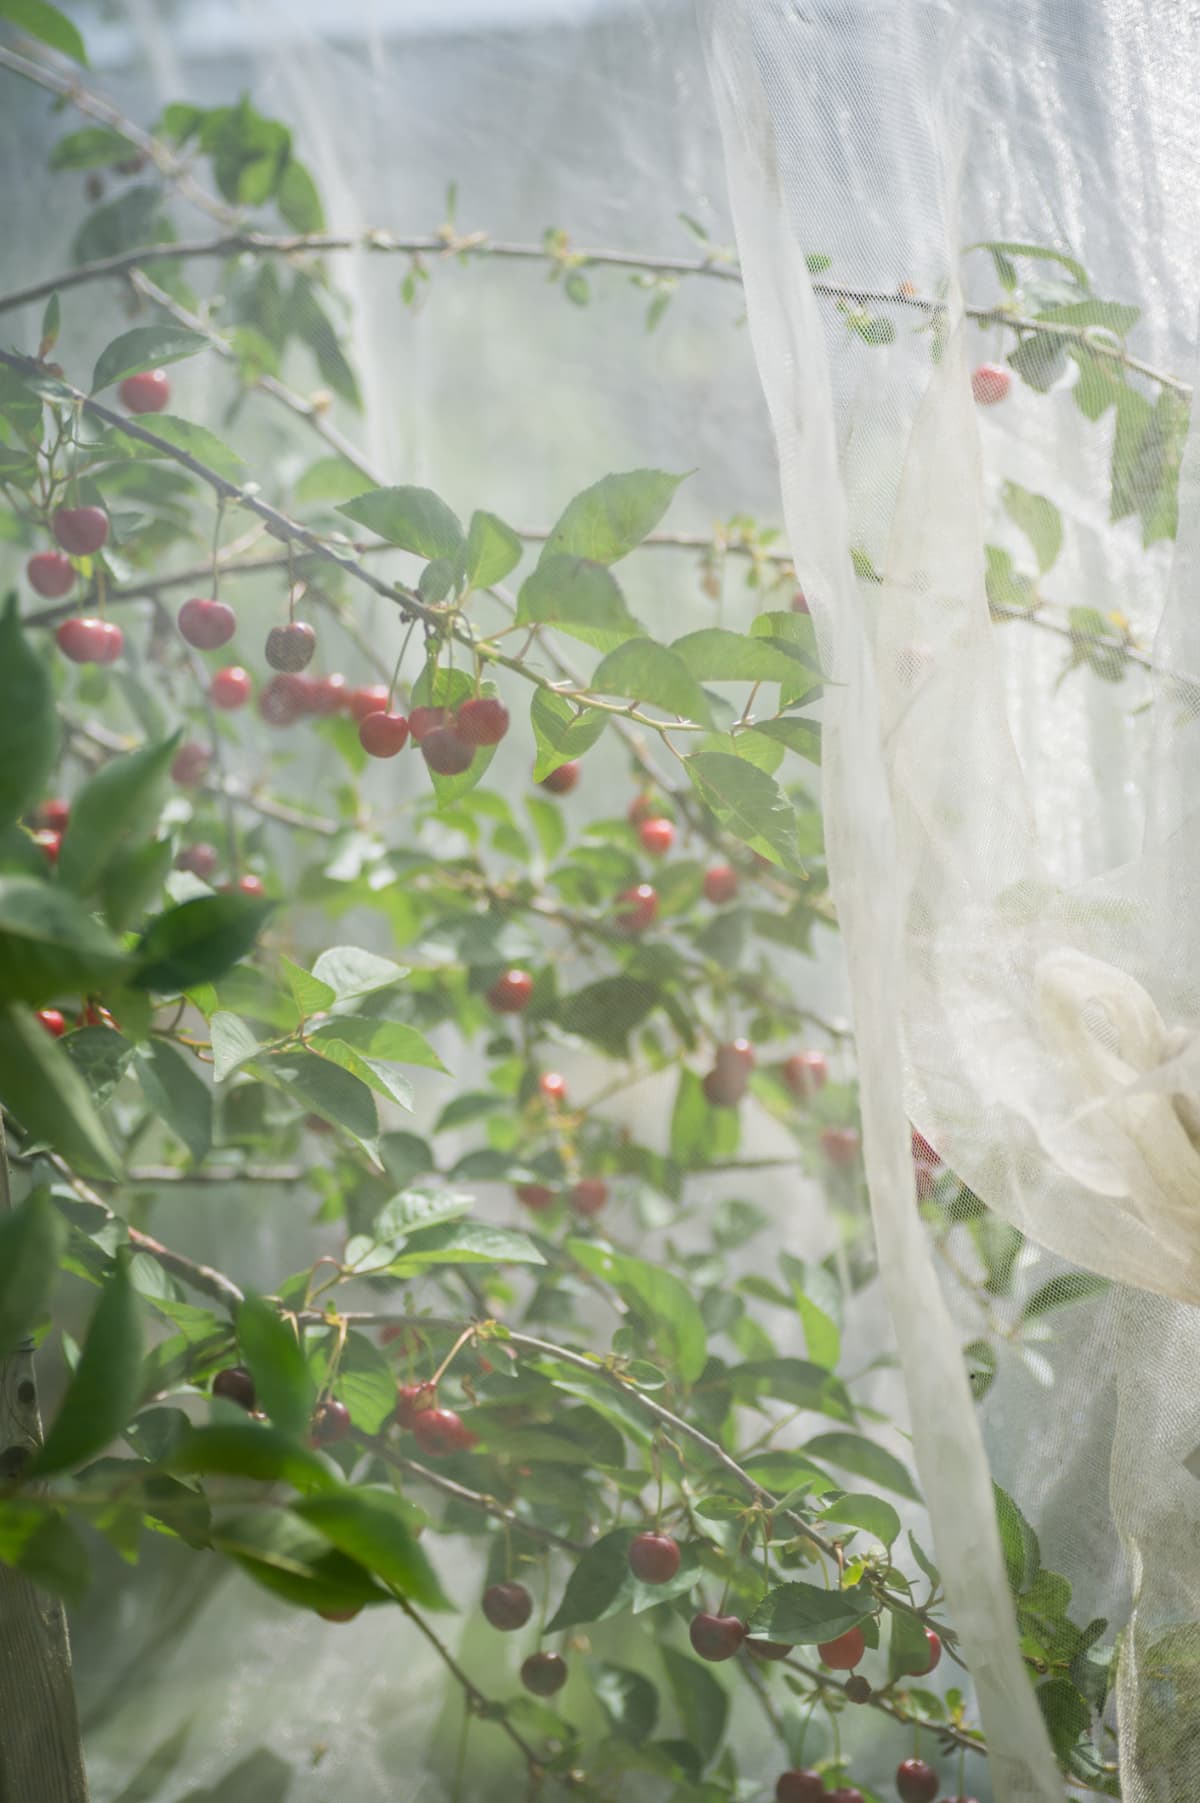 Fruit trees covered with sheer white netting